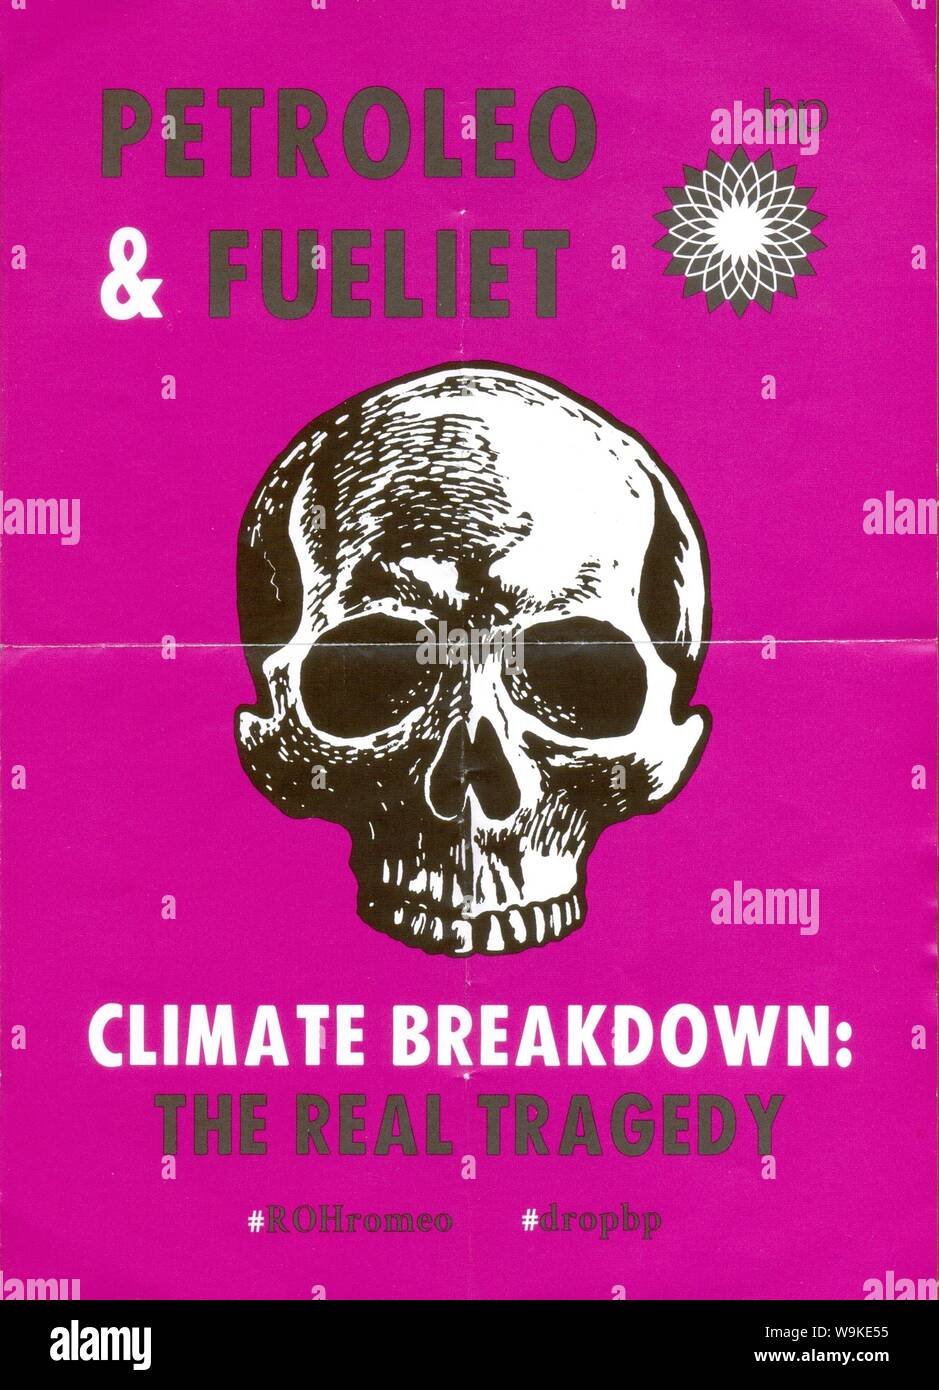 Poster distributed in Trafalgar Square, London by Extinction Rebellion on 11th June 2019 Stock Photo